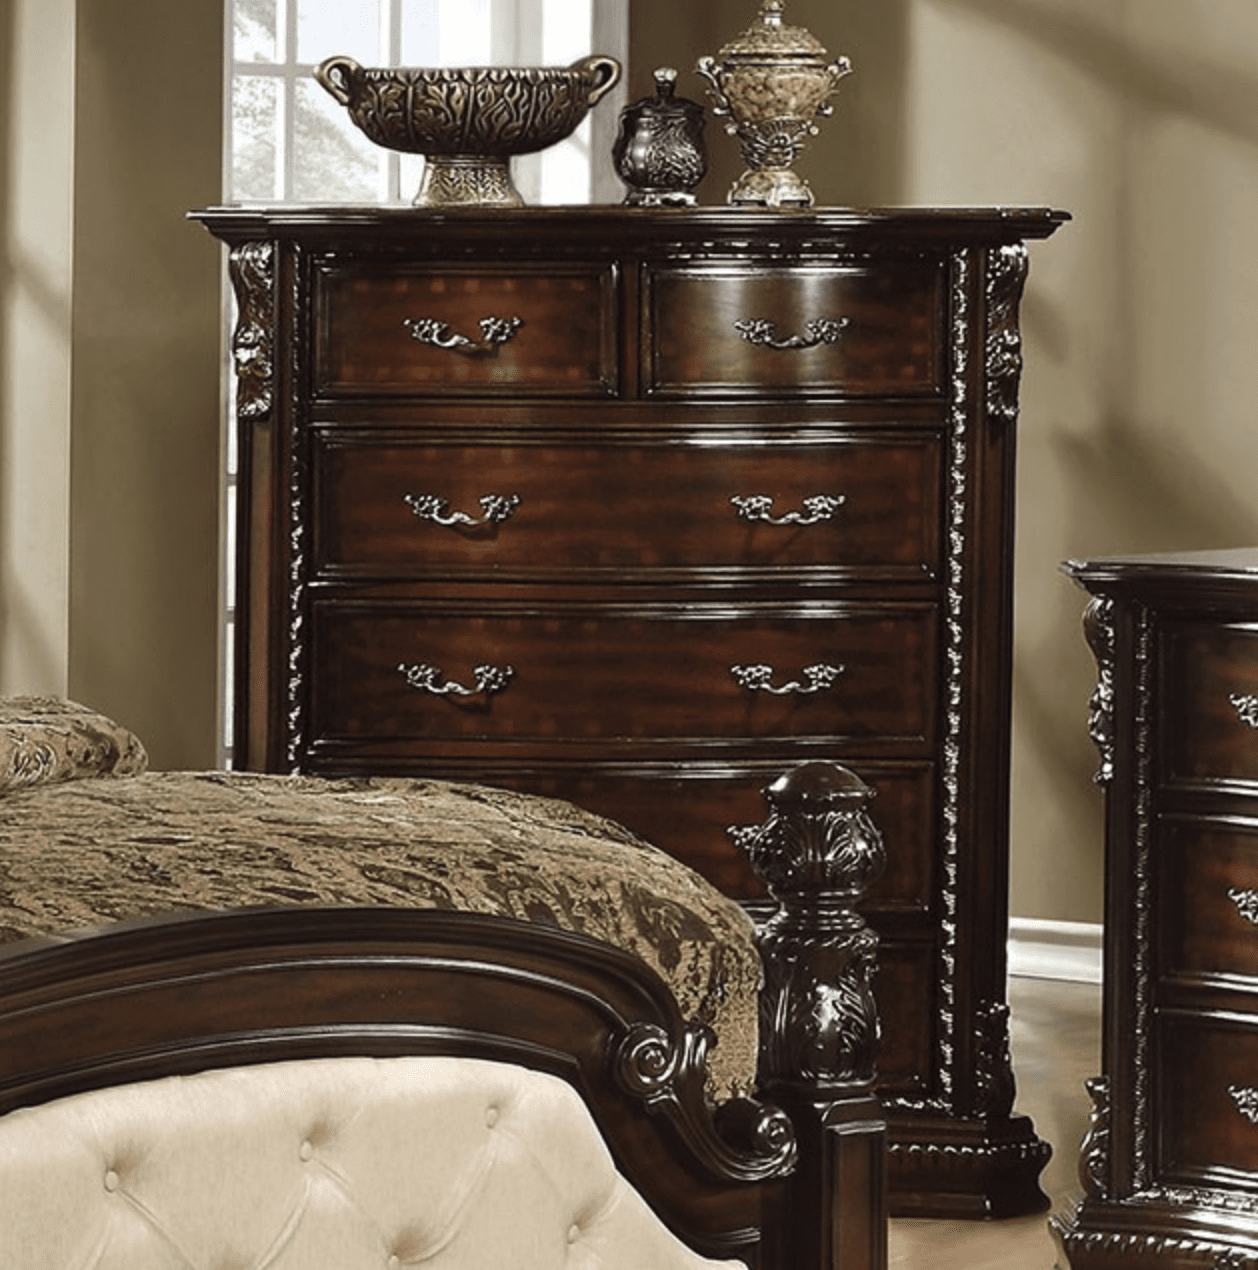 Mandalay Traditional Poster Canopy Bedroom Set in Brown Cherry - Queen